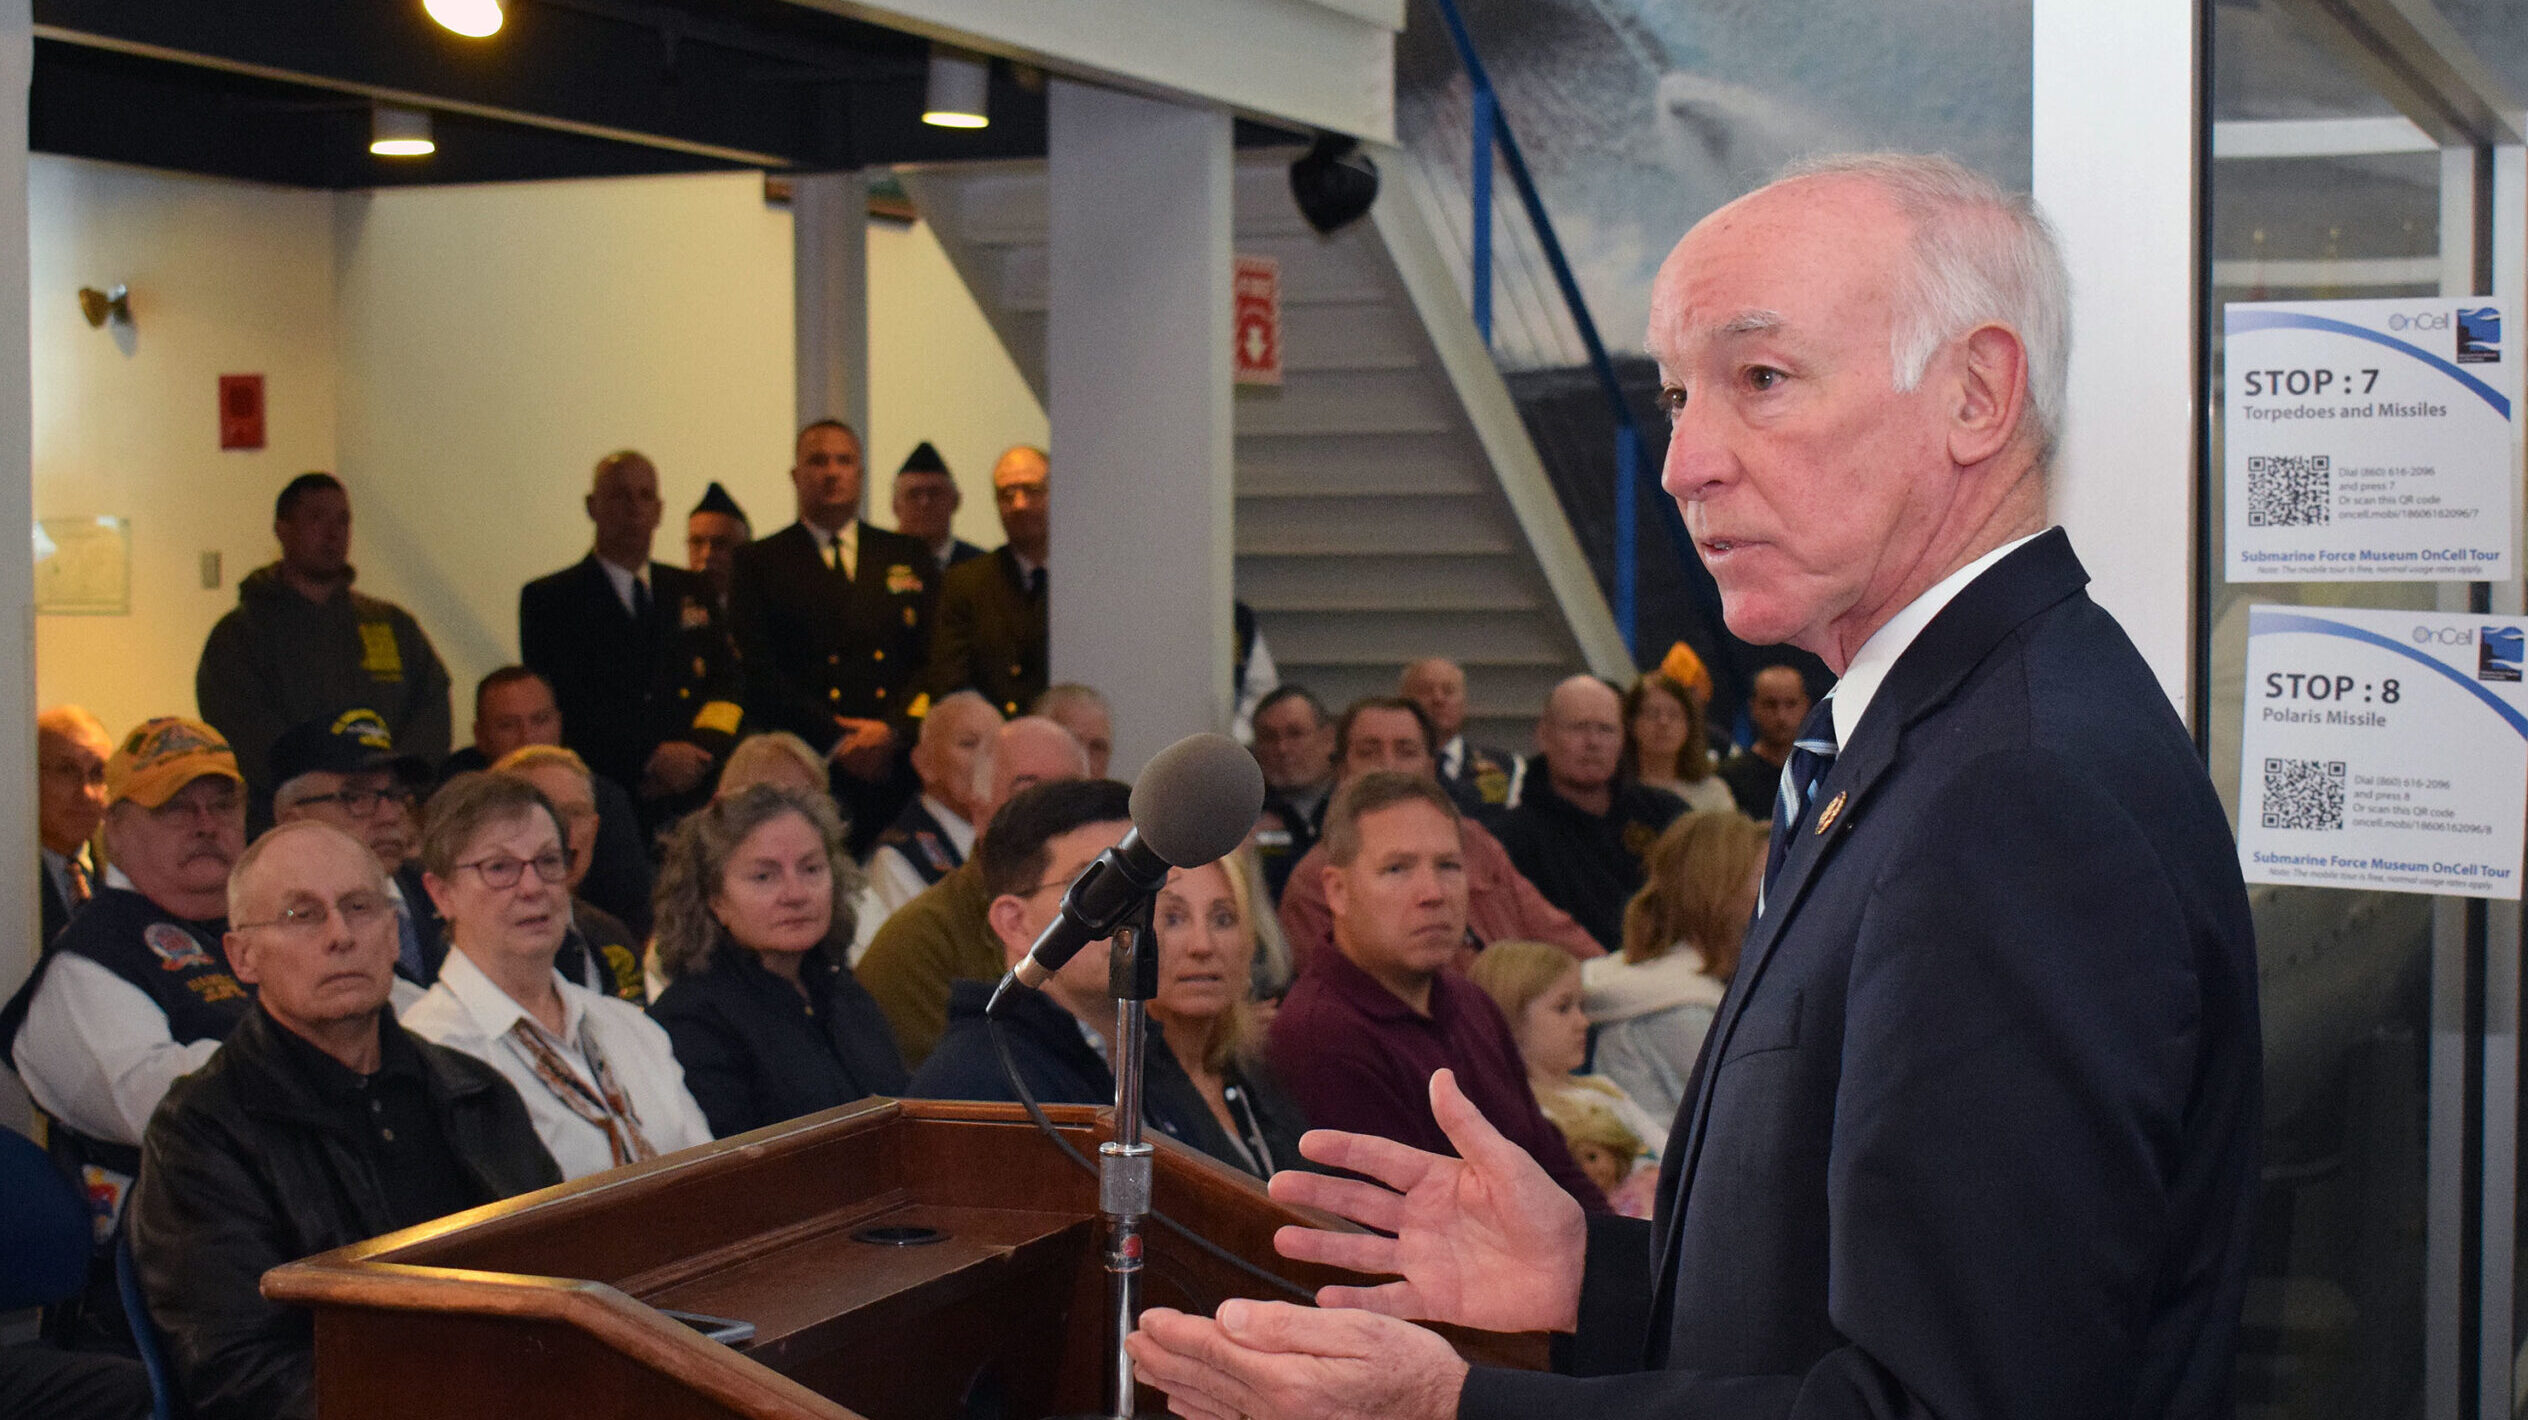 Rep. Joe Courtney: To make AUKUS work, Congress should look to the past - Breaking Defense